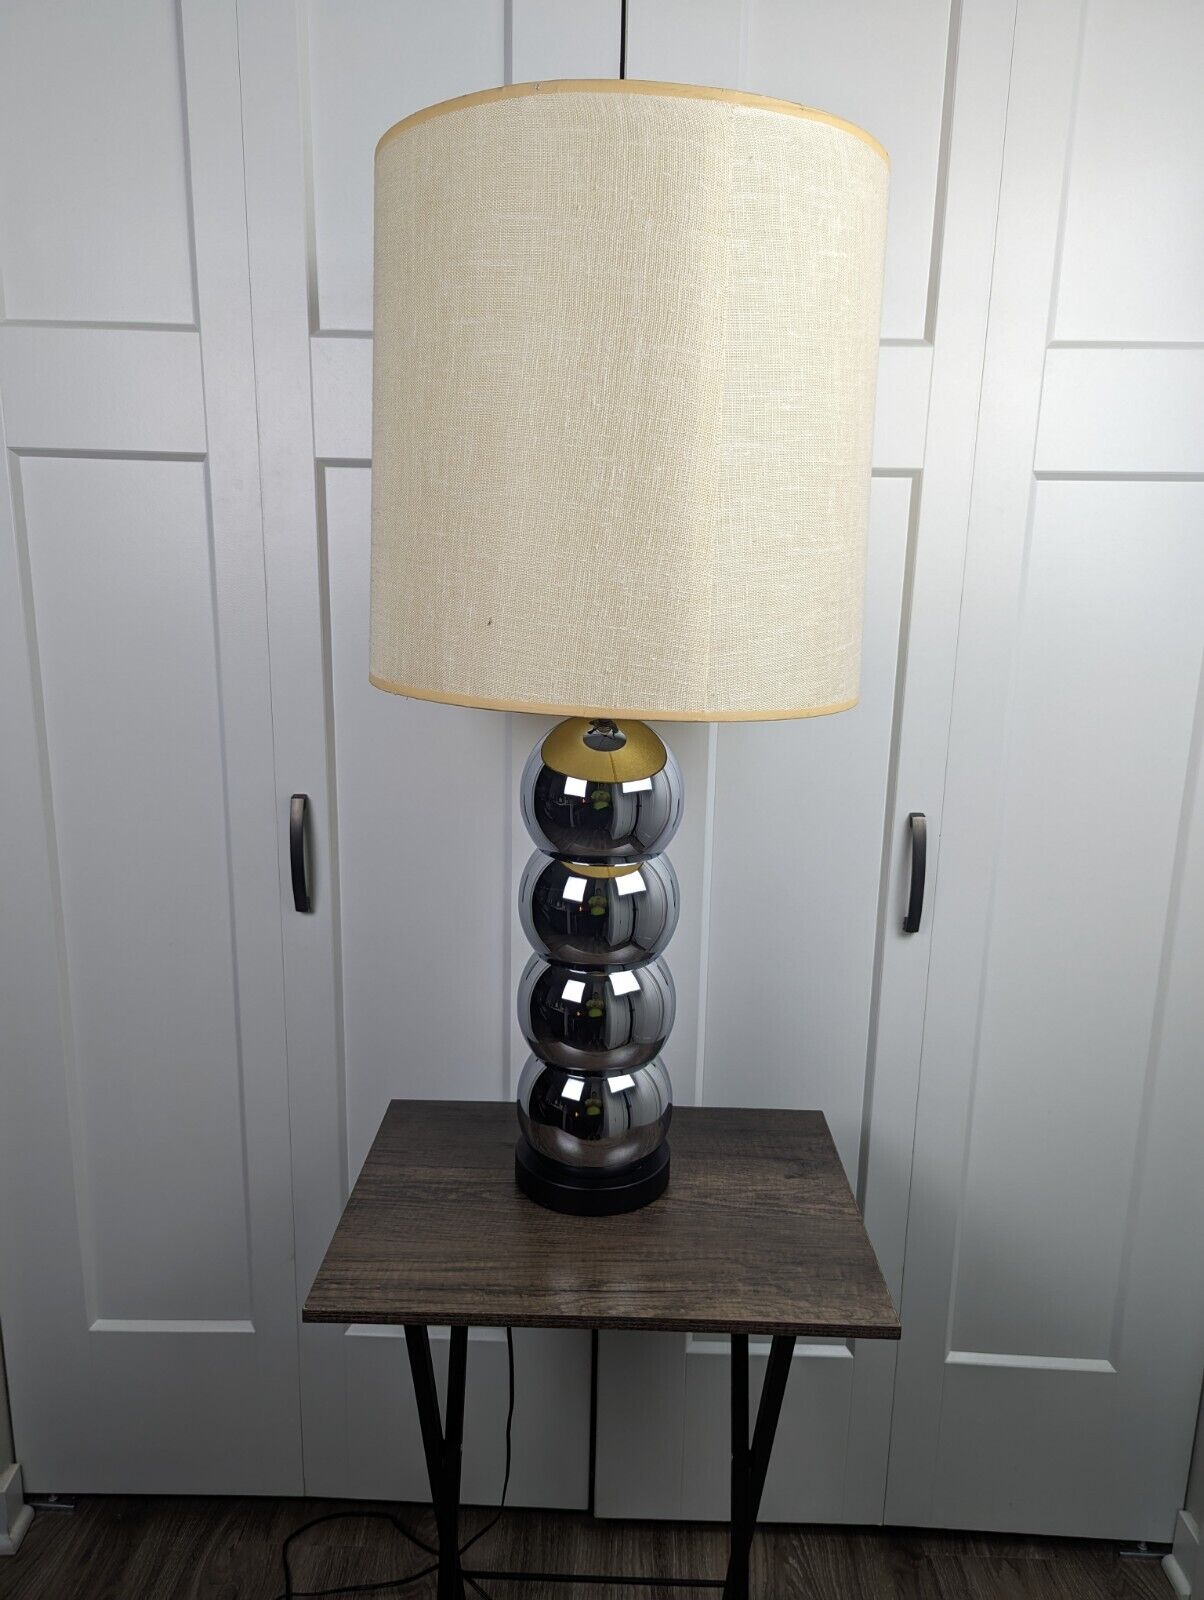 VTG 1970s Sonnenman Kovacs Chrome Stacked Ball 33.5” Table Lamp with Shade